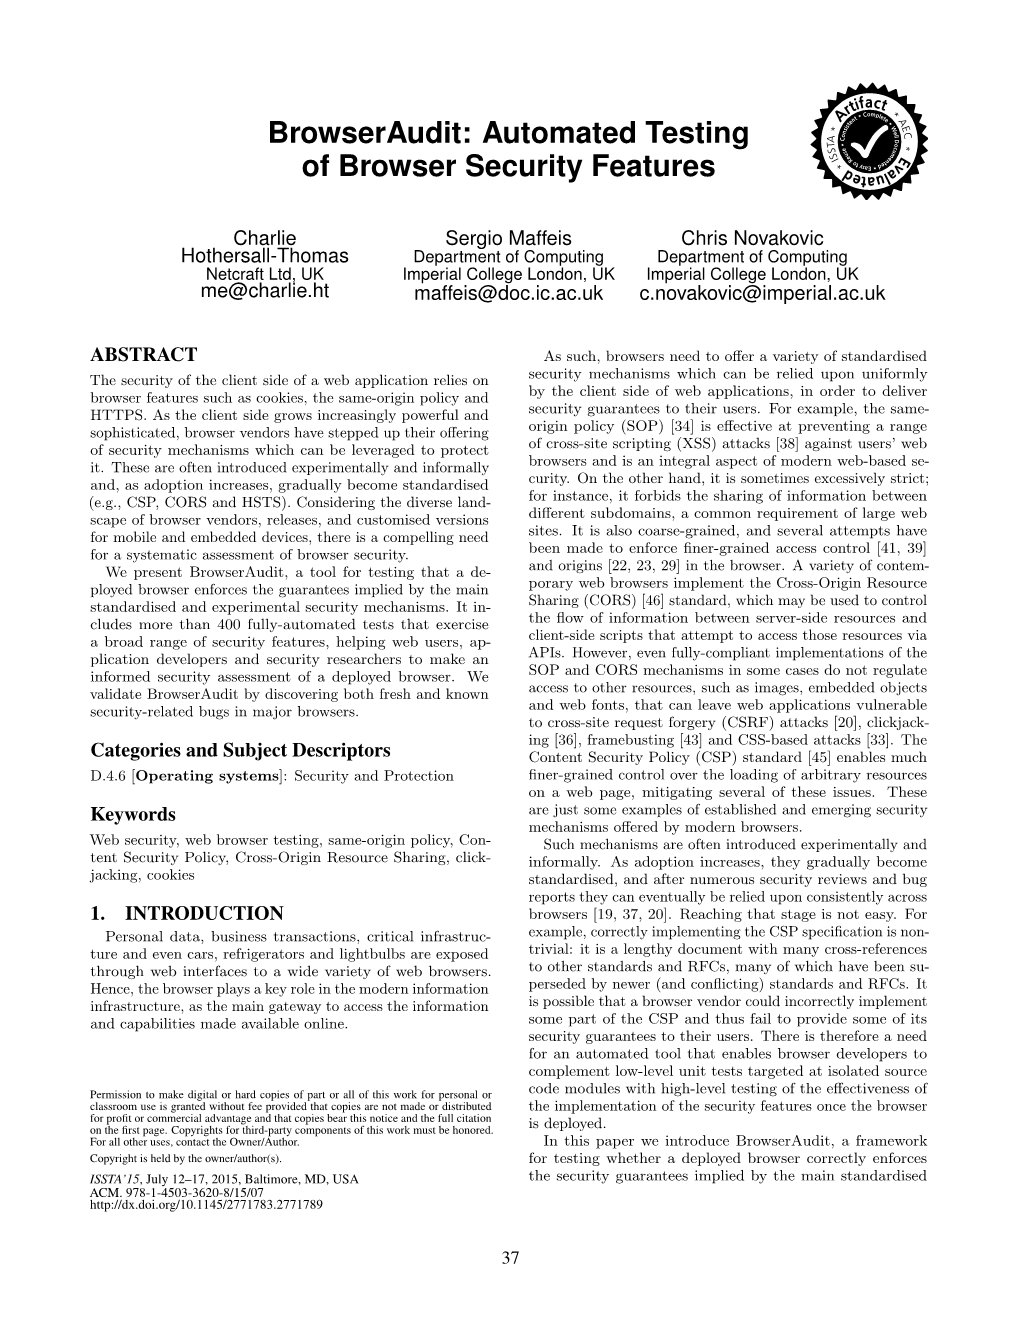 Browseraudit: Automated Testing of Browser Security Features